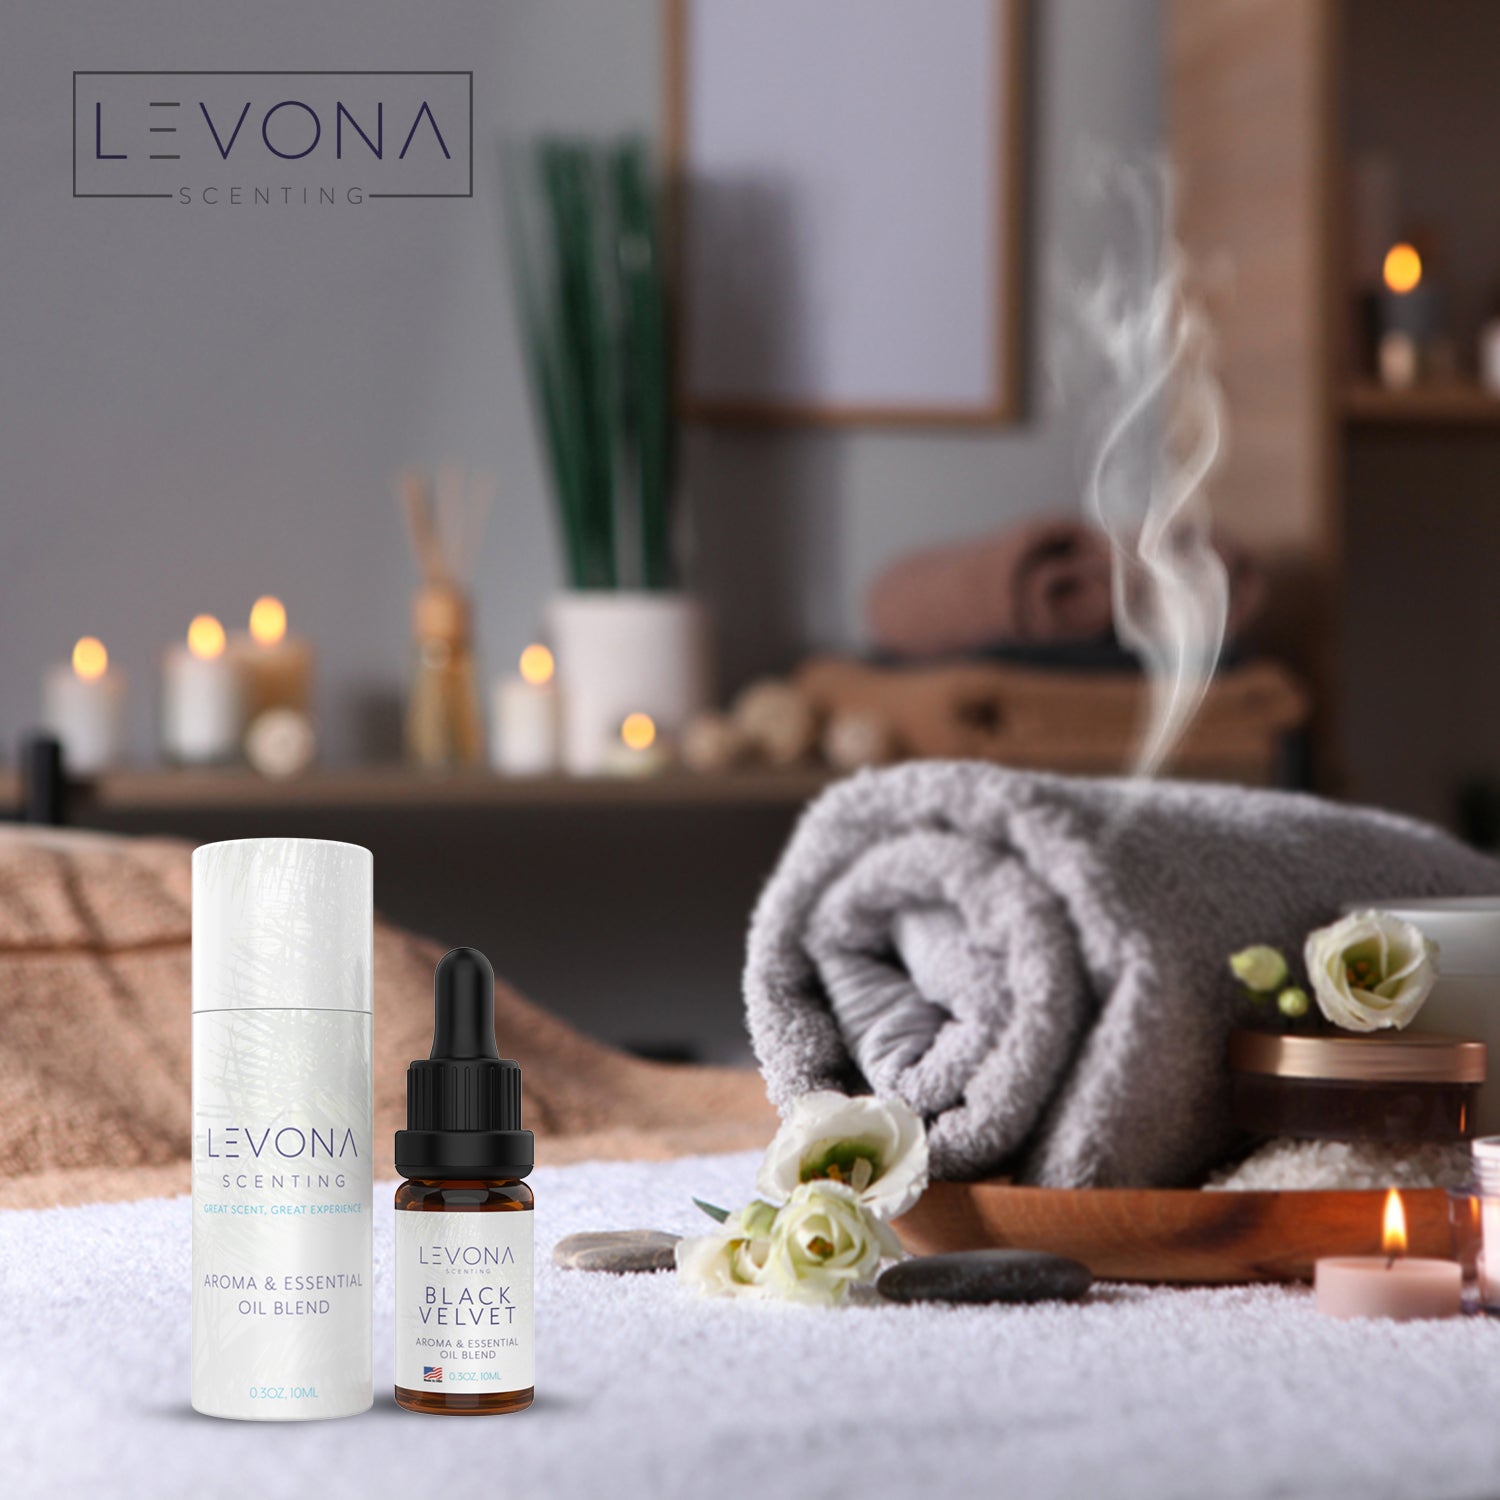 Levona Scent Essential Oils For Diffusers For Home: Hotel and Home Luxury  Scents Oils For Diffuser - Rushing Rapids Scented Oil With Citrus Essential  Oils And A Touch Of Vanilla Fragrance Oil 